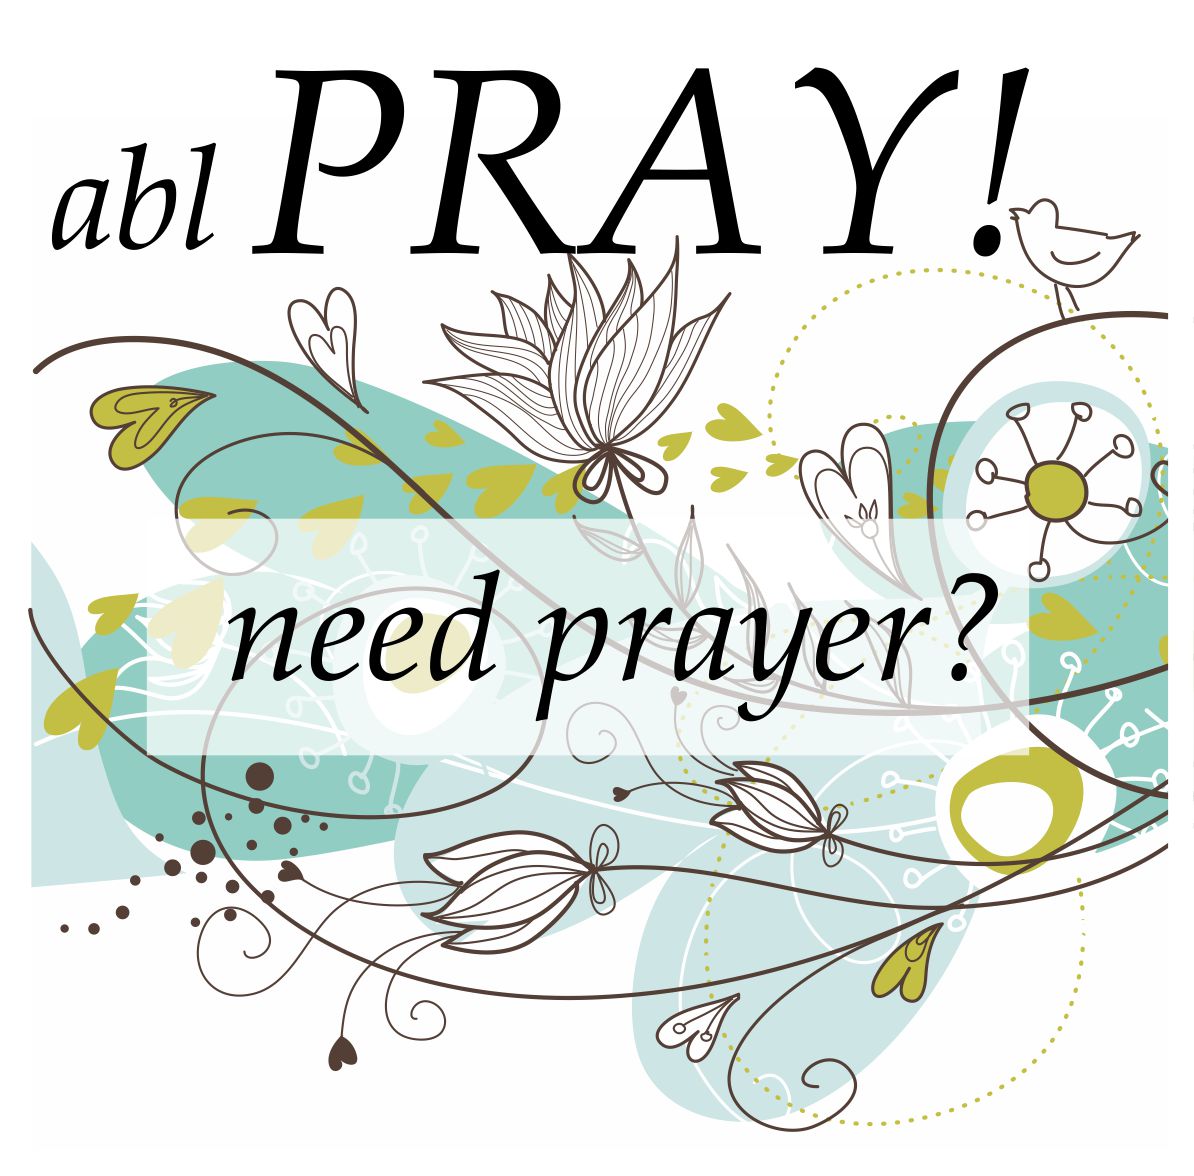 contact us fro personal prayer